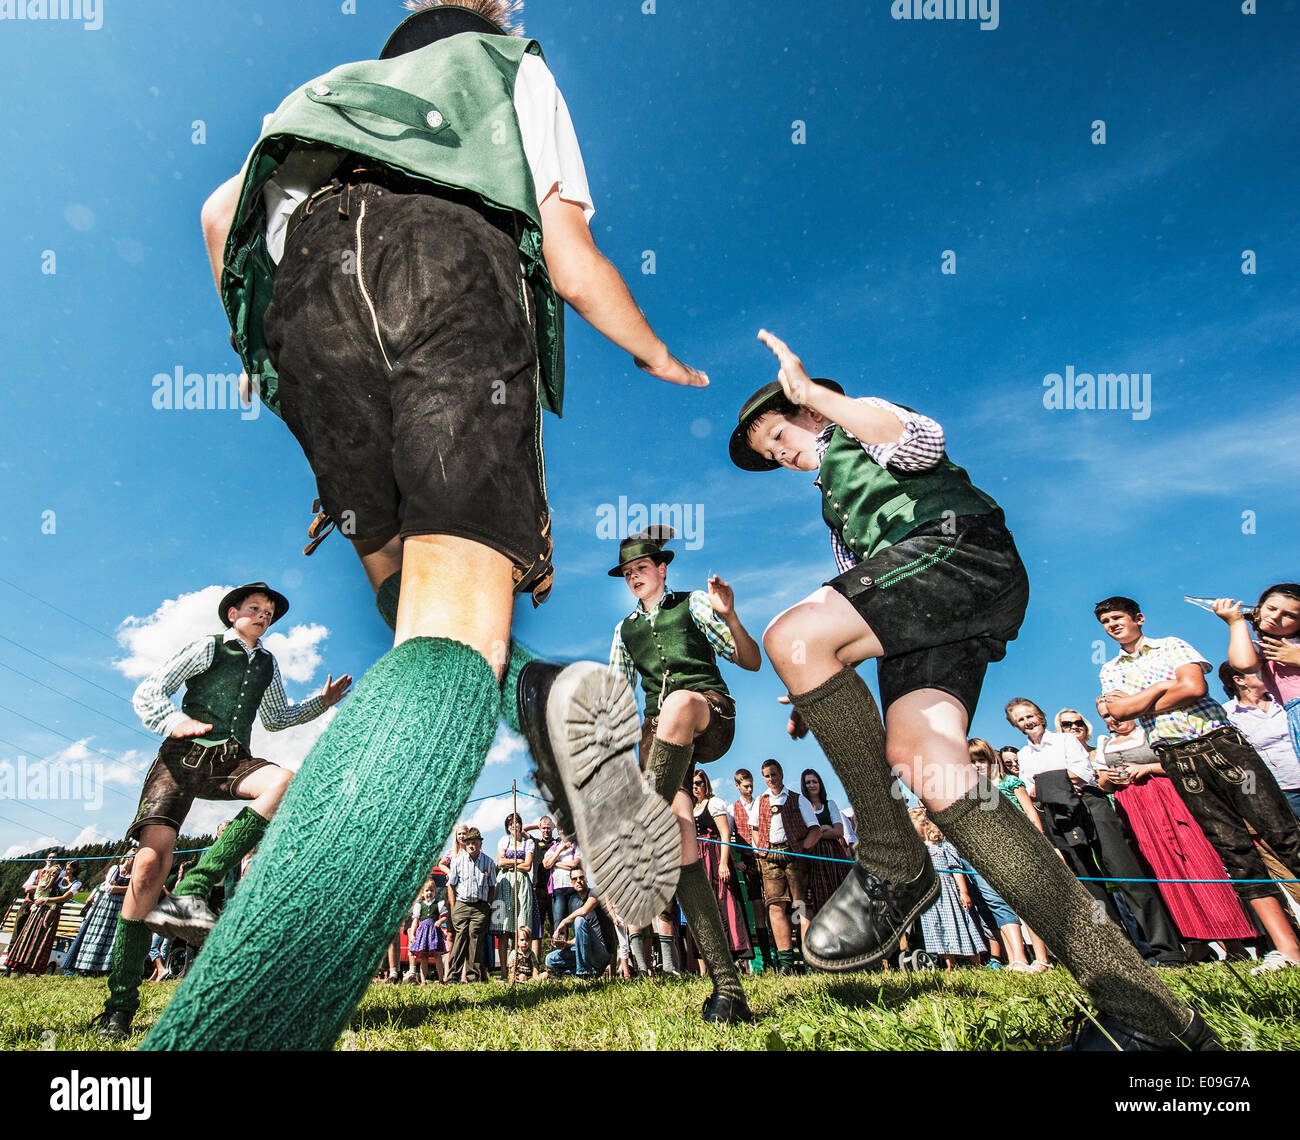 Austria, Irdning, Boys in traditional clothing dancing the Schuhplattler at May festival Stock Photo